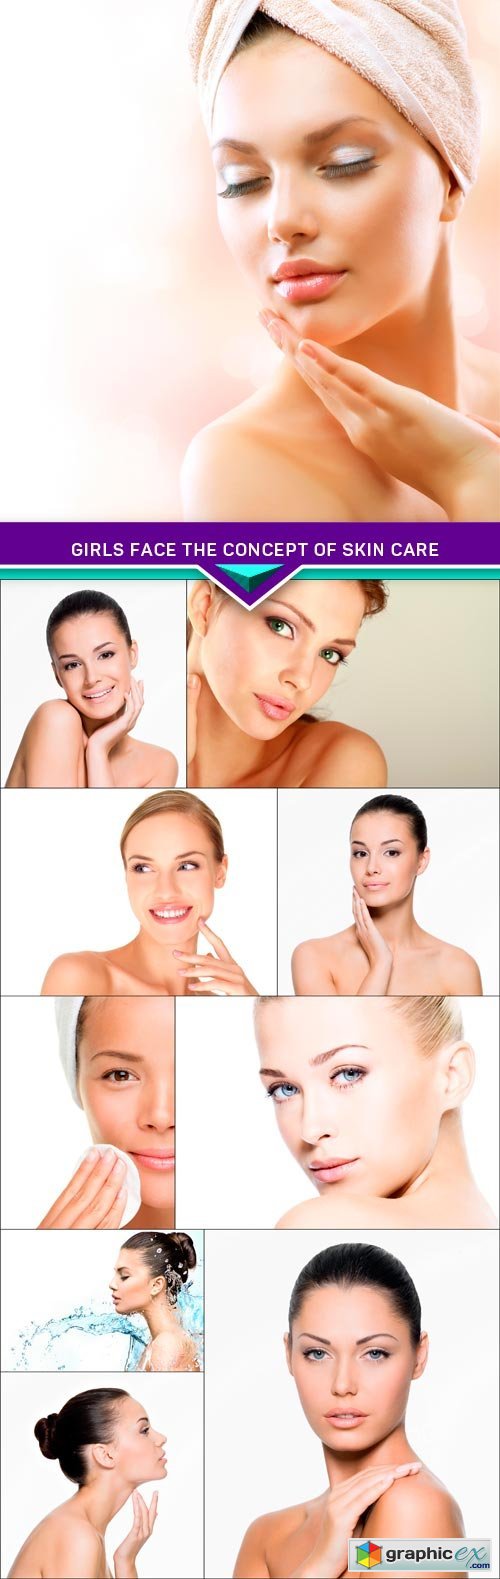 Girls face the concept of skin care 10x JPEG